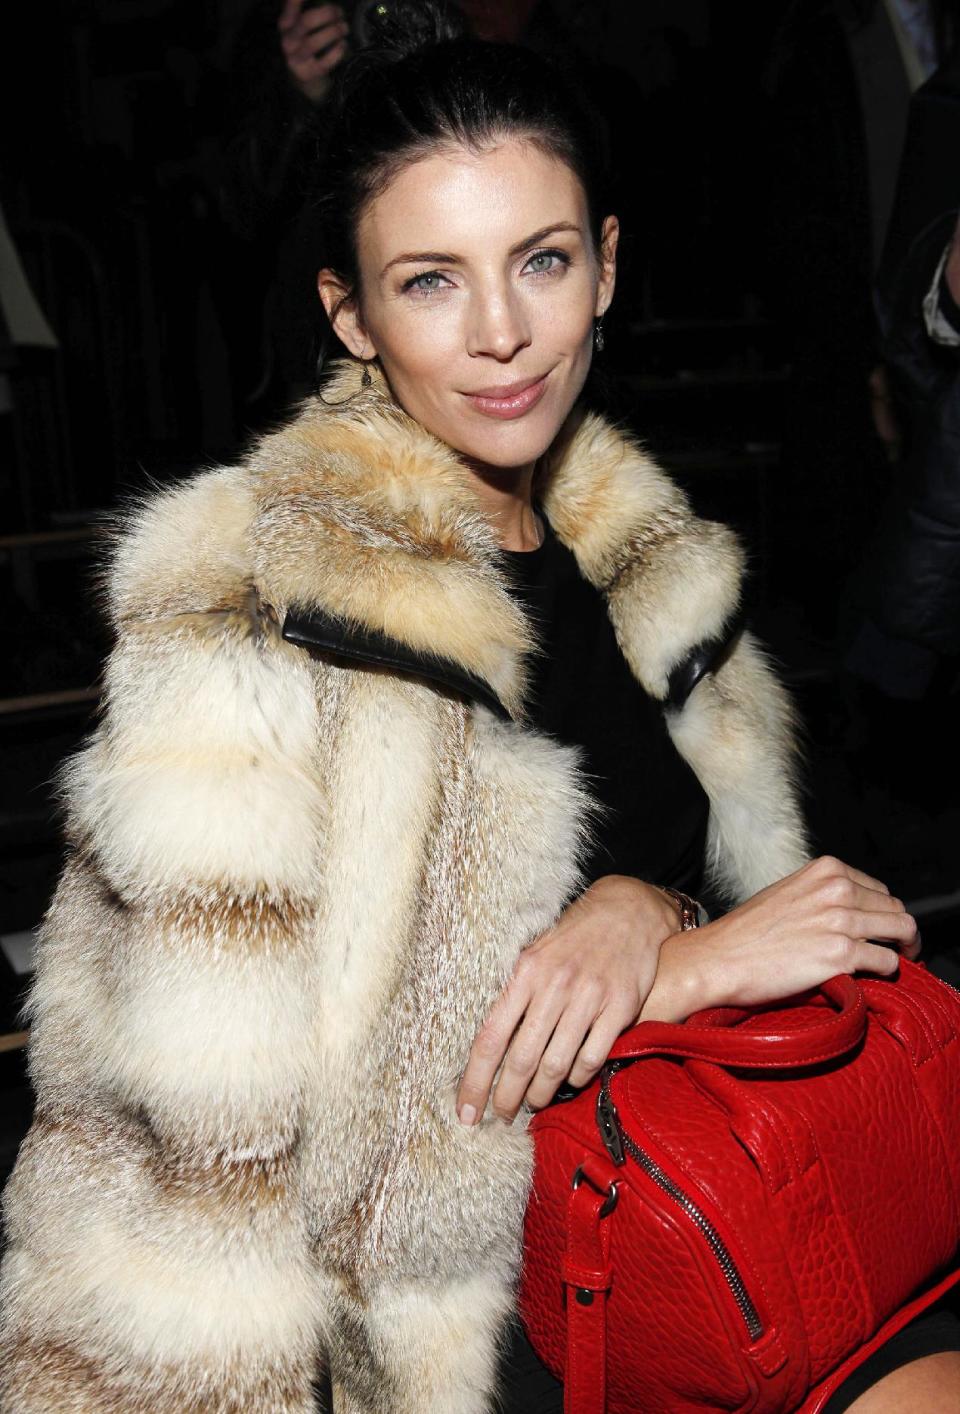 Liberty Ross is seen at the Fall 2013 Alexander Wang Runway Show, on Saturday, Feb. 9, 2013 in New York. Ross says she's lying low in the wake of her very public split from husband, director Rupert Sanders. Ross filed for divorce in January, five months after news broke that Sanders had an affair with Kristen Stewart. Sanders directed both Stewart and Ross in "Snow White and the Huntsman." Ross also walked the runway for the Alexander Wang Spring 2013 collection on Sept. 8, 2012. (Photo by Amy Sussman/Invision/AP)